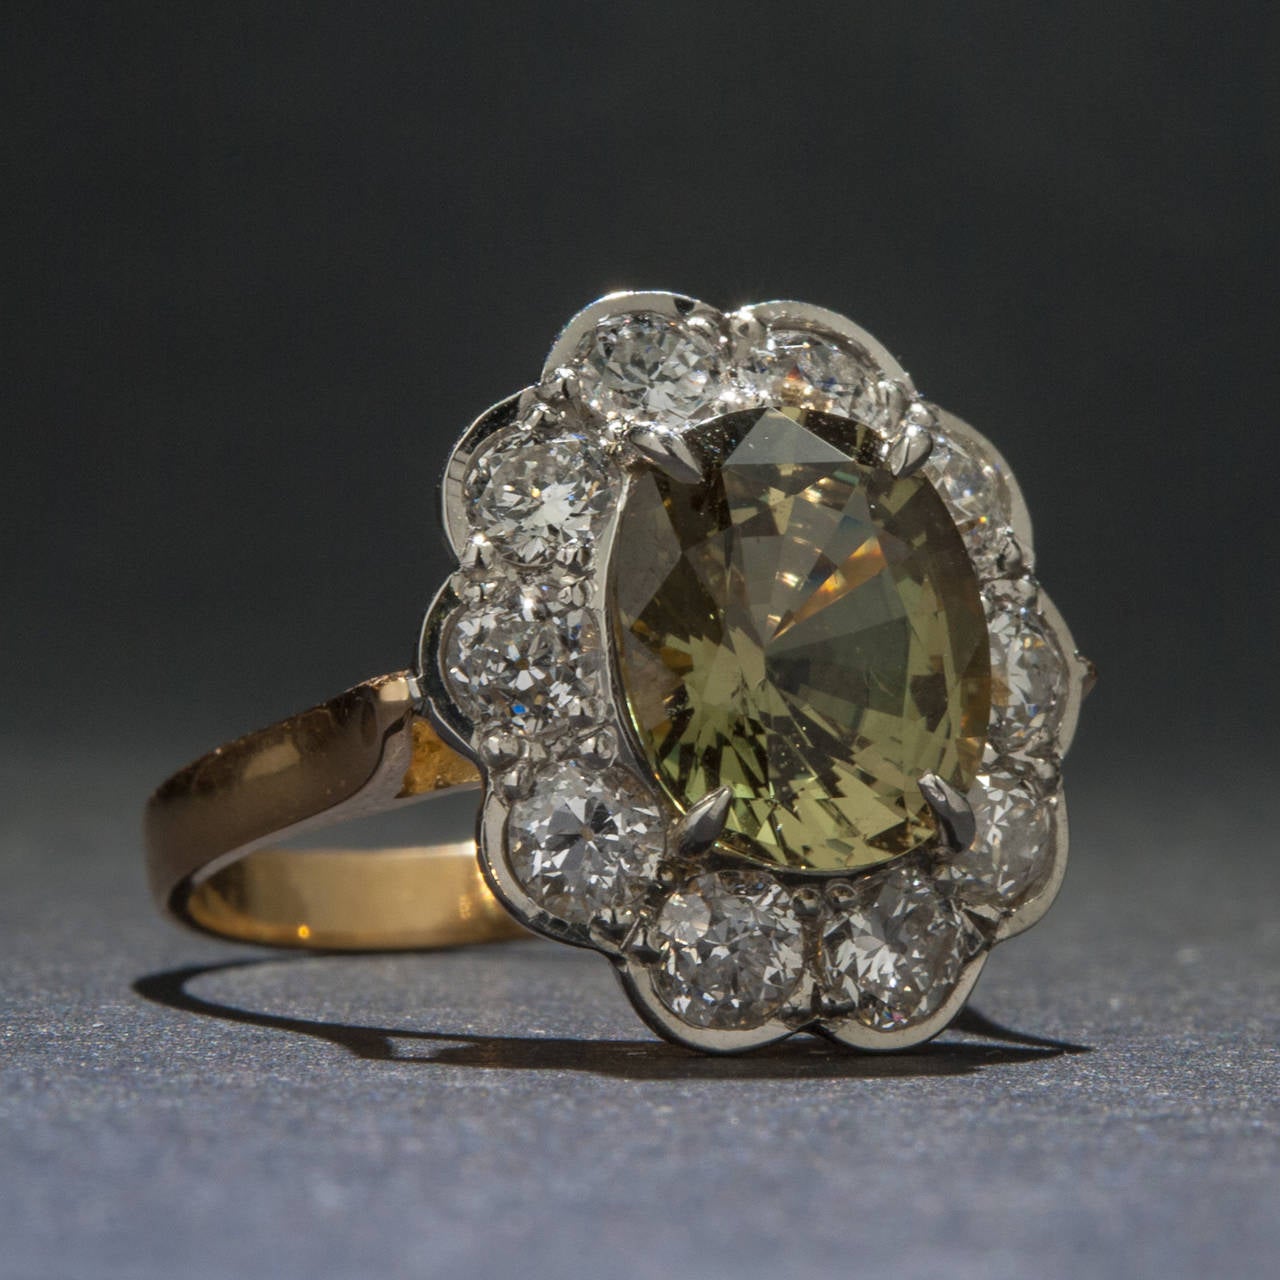 A striking 3.23 carat Alexandrite, Platinum and 18k Yellow Gold Ring. The center stone is GIA/AJI Certified and surrounded by 1.40 total carats of Diamonds with SI1-SI2 clarity, H-I color, and Good cut. The ring is currently sized at 6 1/2.